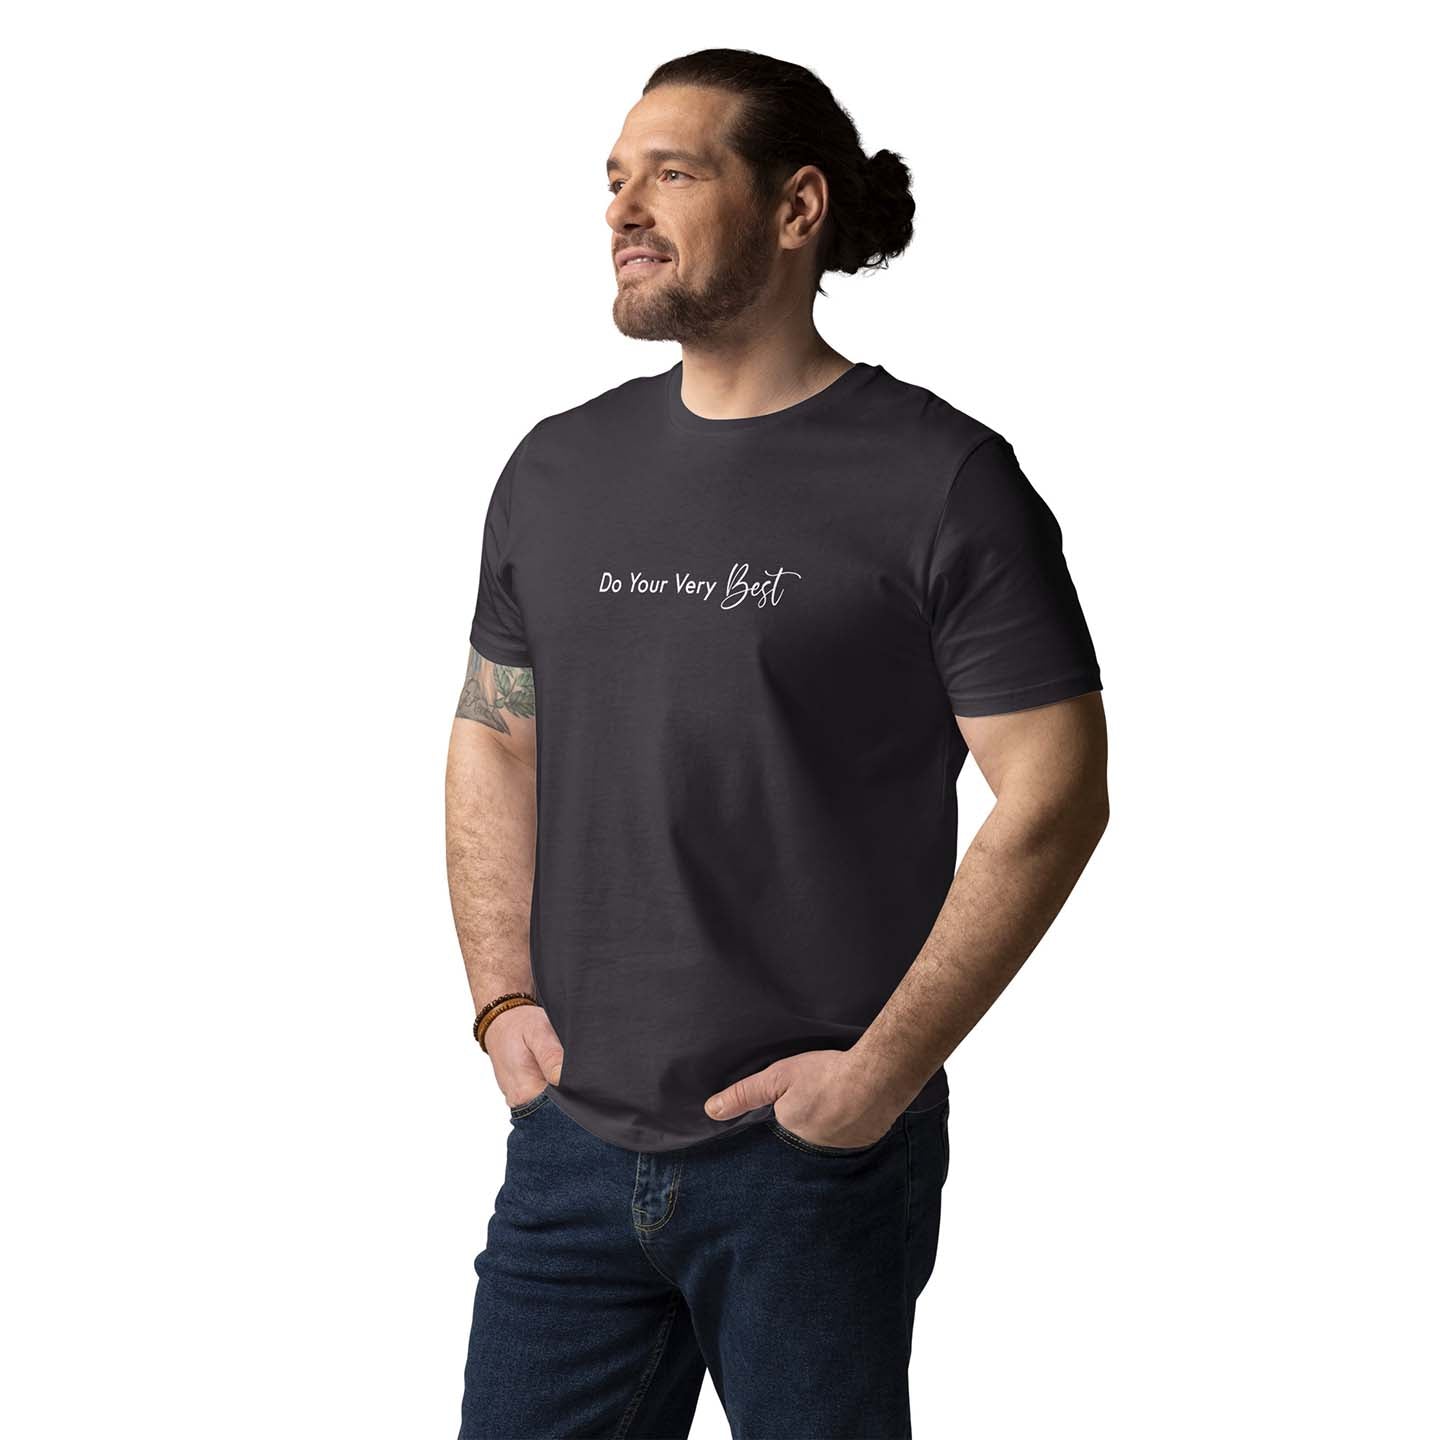 Men dark gray 100% organic cotton t-shirt with motivational quote, "Do Your Very Best."